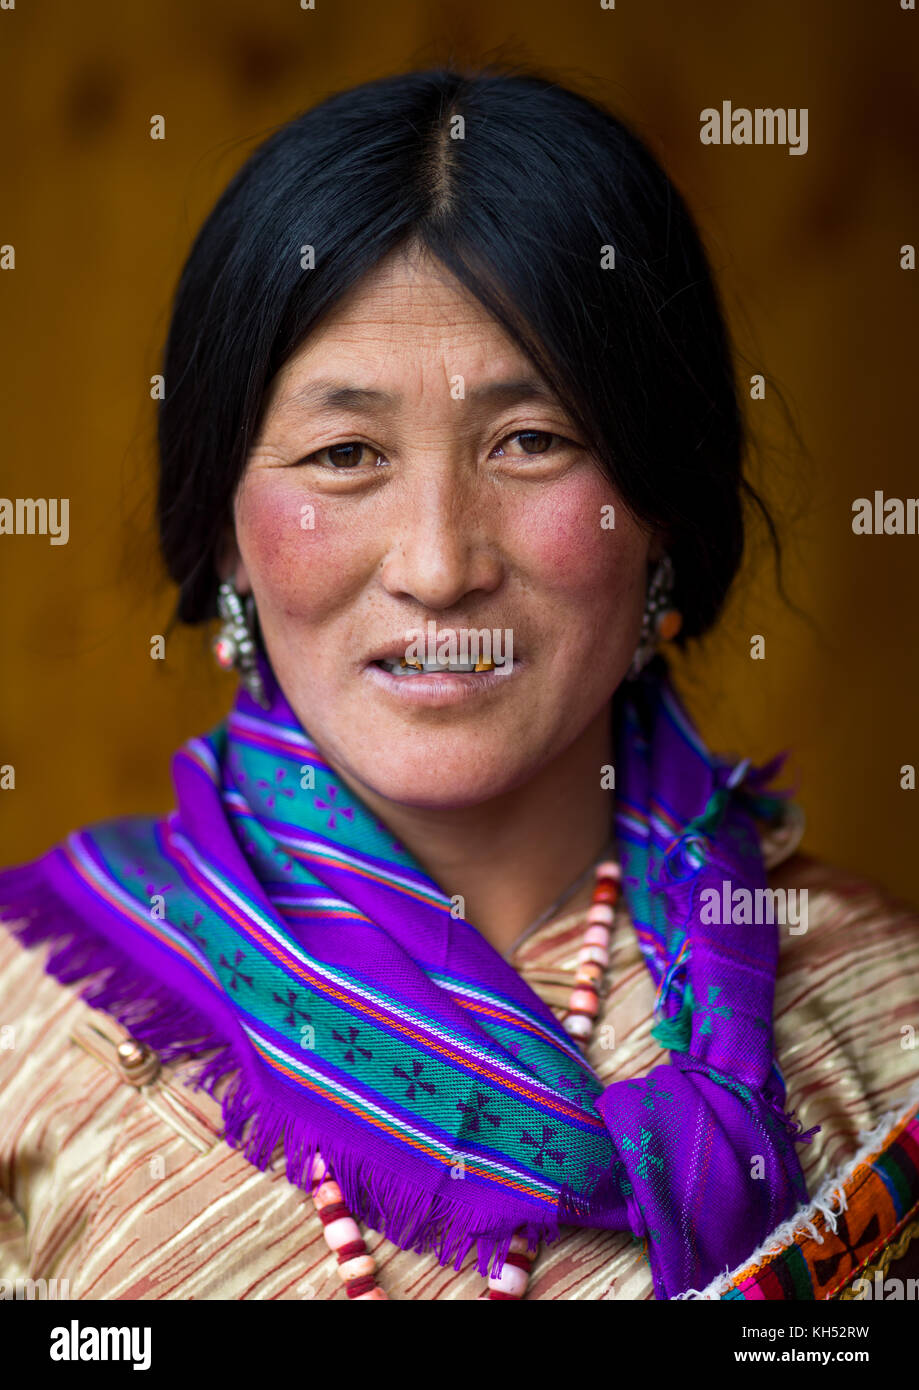 Portrait of a nyingma tibetan nomad woman during a pilgrimage in Labrang monastery, Gansu province, Labrang, China Stock Photo